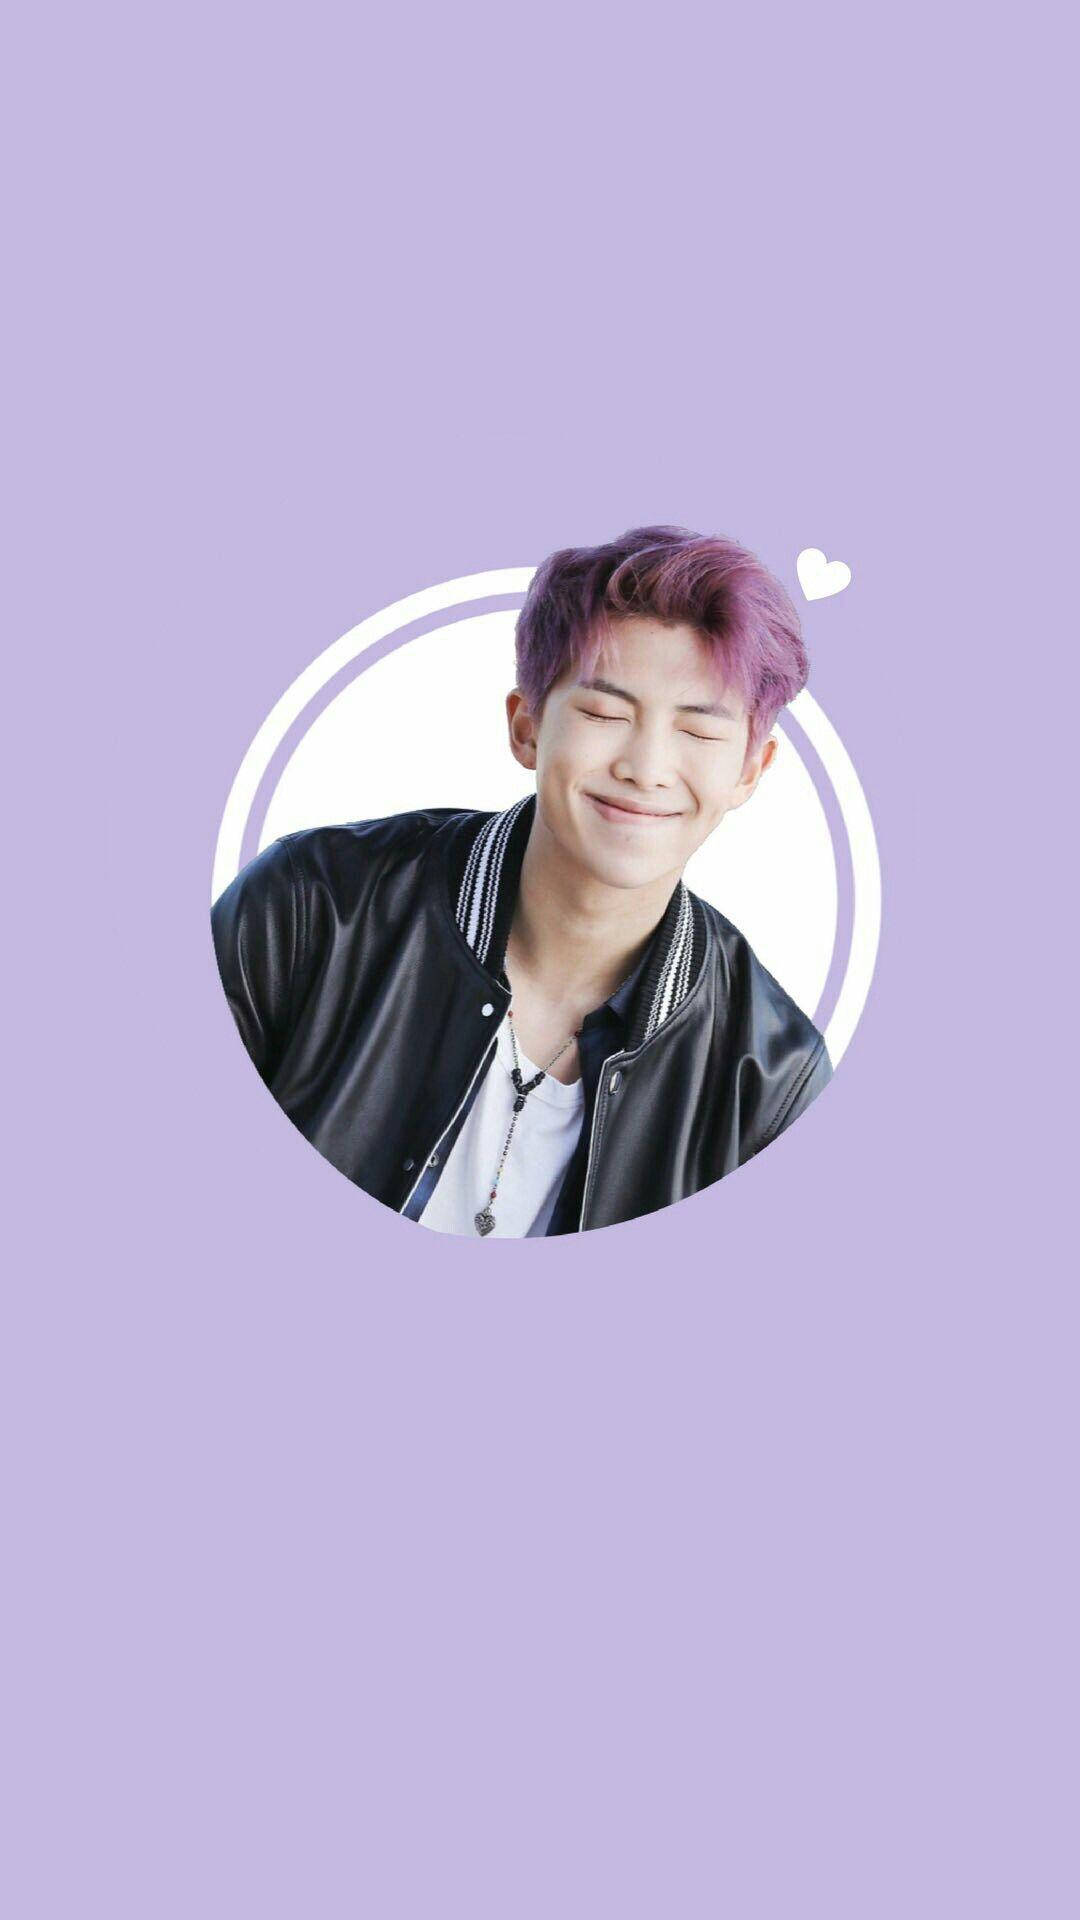 Cute Bts Rm In Circle On Purple Background